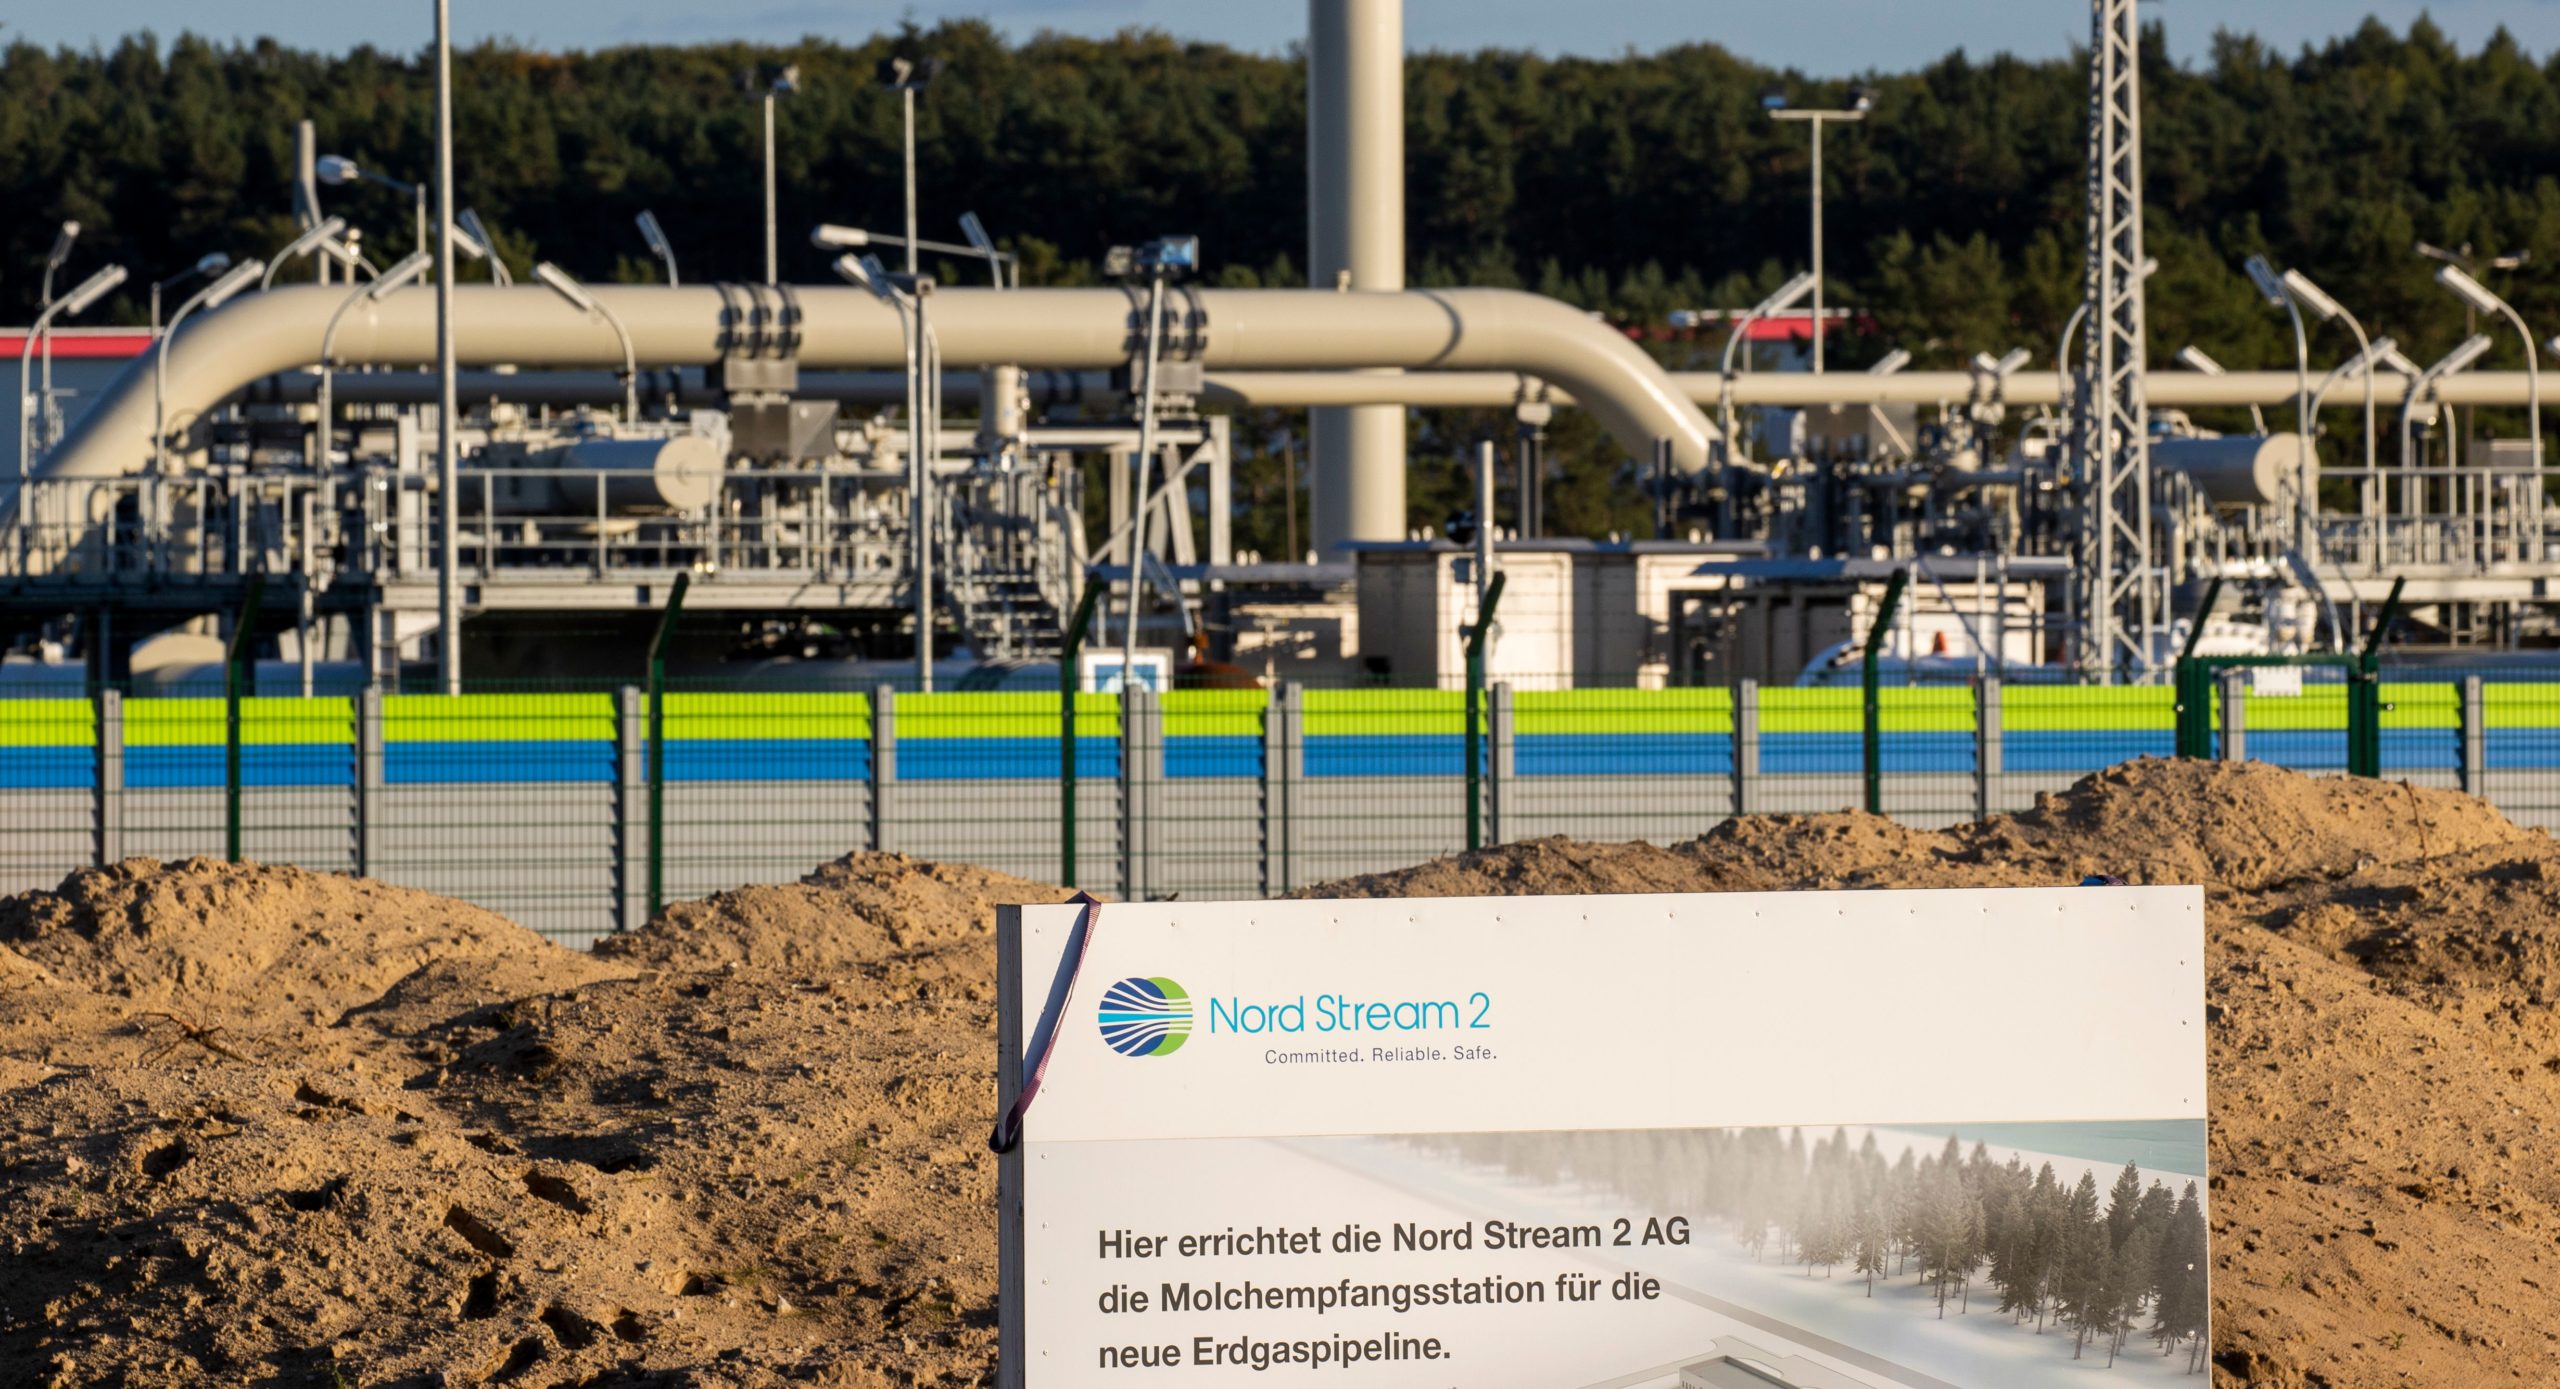 The Nord Stream 2 gas line landfall facility in Lubmin, north eastern Germany, on September 7, 2020. - German Chancellor Angela Merkel will not rule out consequences for the Nord Stream 2 gas pipeline project if Russia fails to thoroughly investigate the poisoning of opposition leader Alexei Navalny, her spokesman said. (Photo by Odd ANDERSEN / AFP) (Photo by ODD ANDERSEN/AFP via Getty Images)